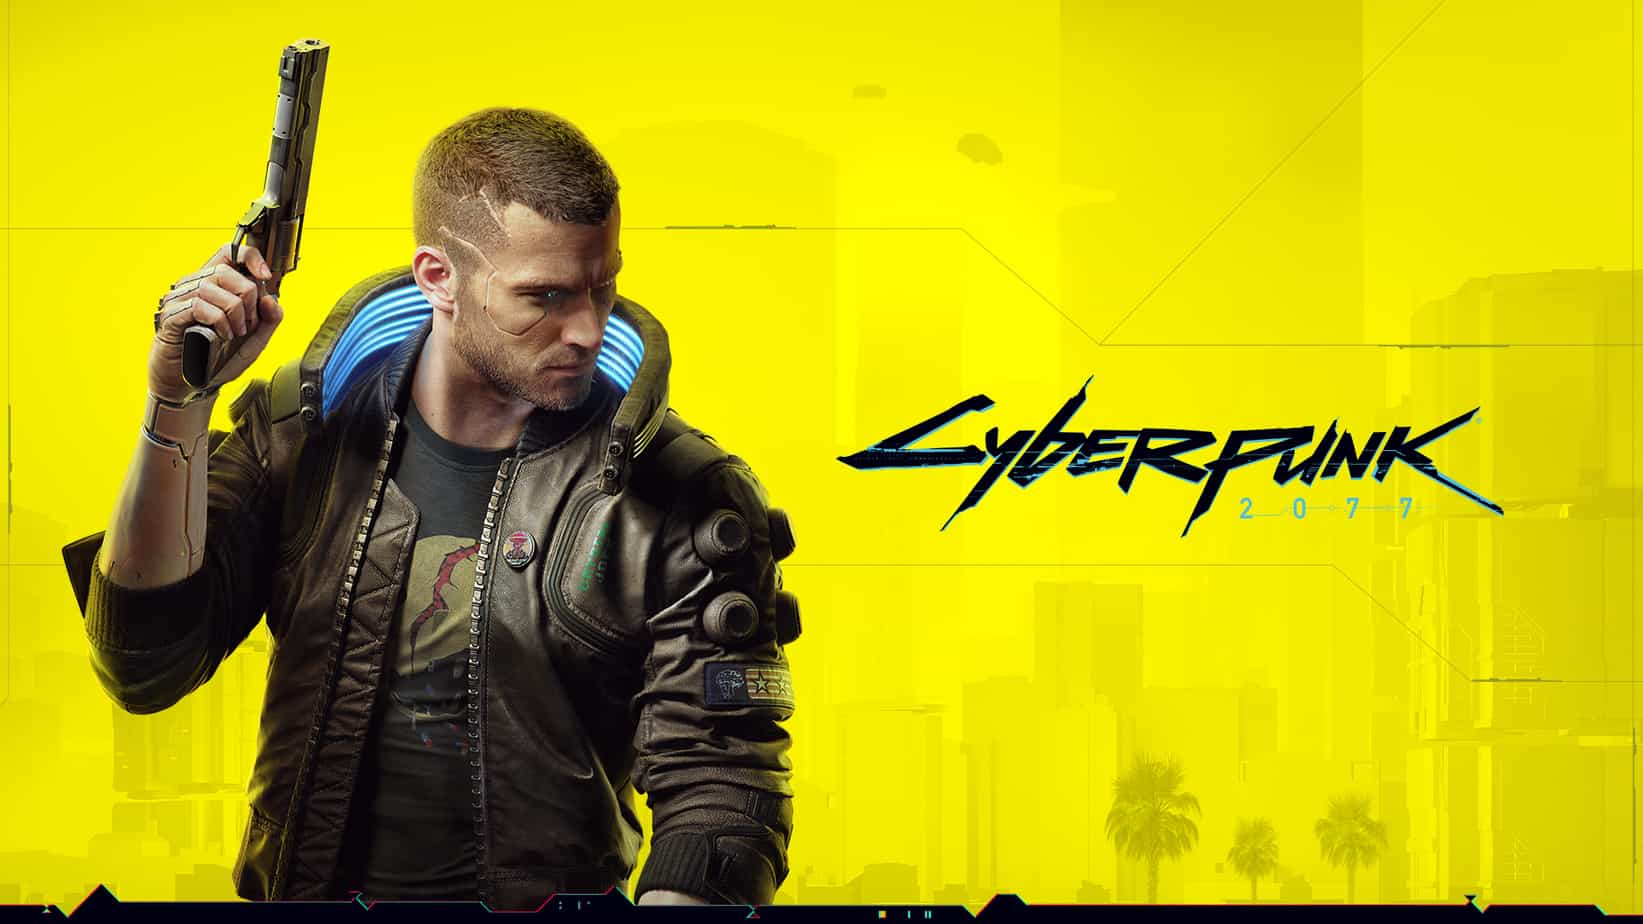 Cyberpunk 2077: The Developer's Journey from Concept to Release